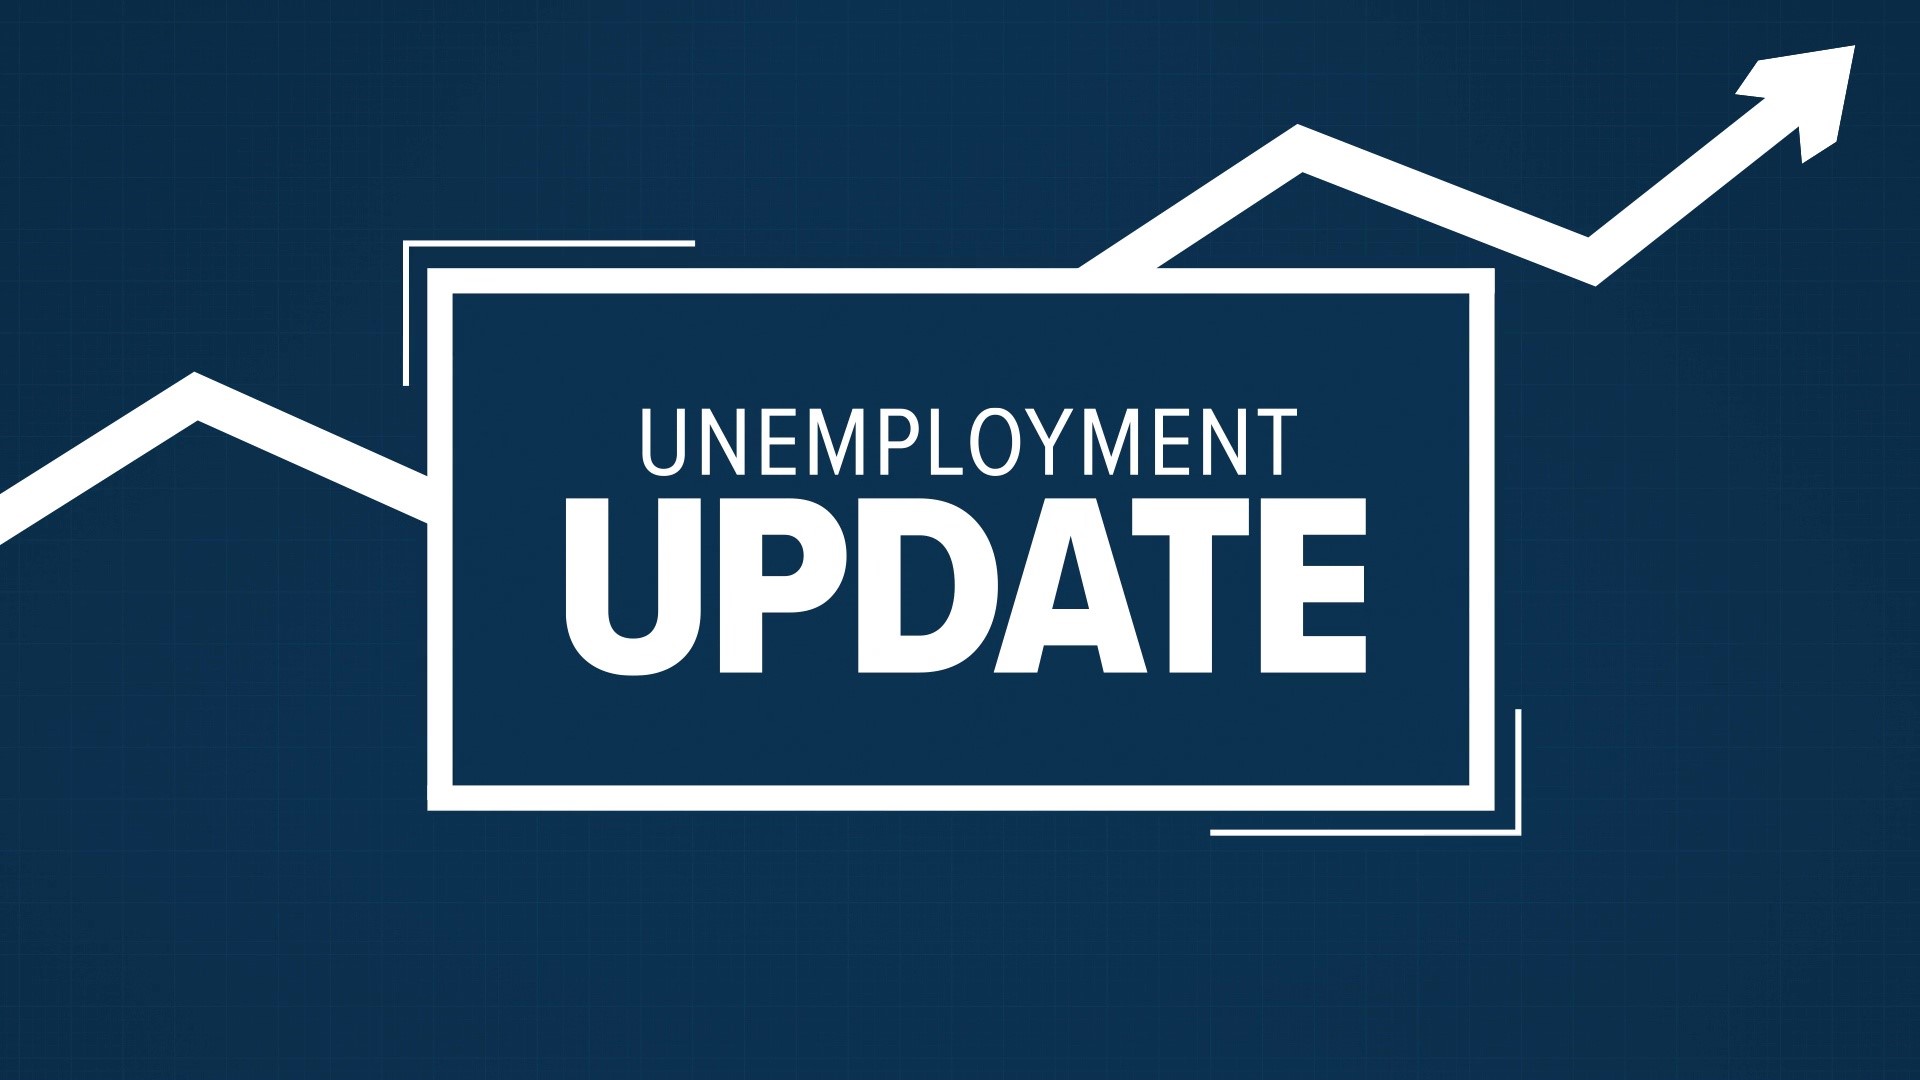 $18,386,679.39 in unemployment insurance benefits were paid out last week.